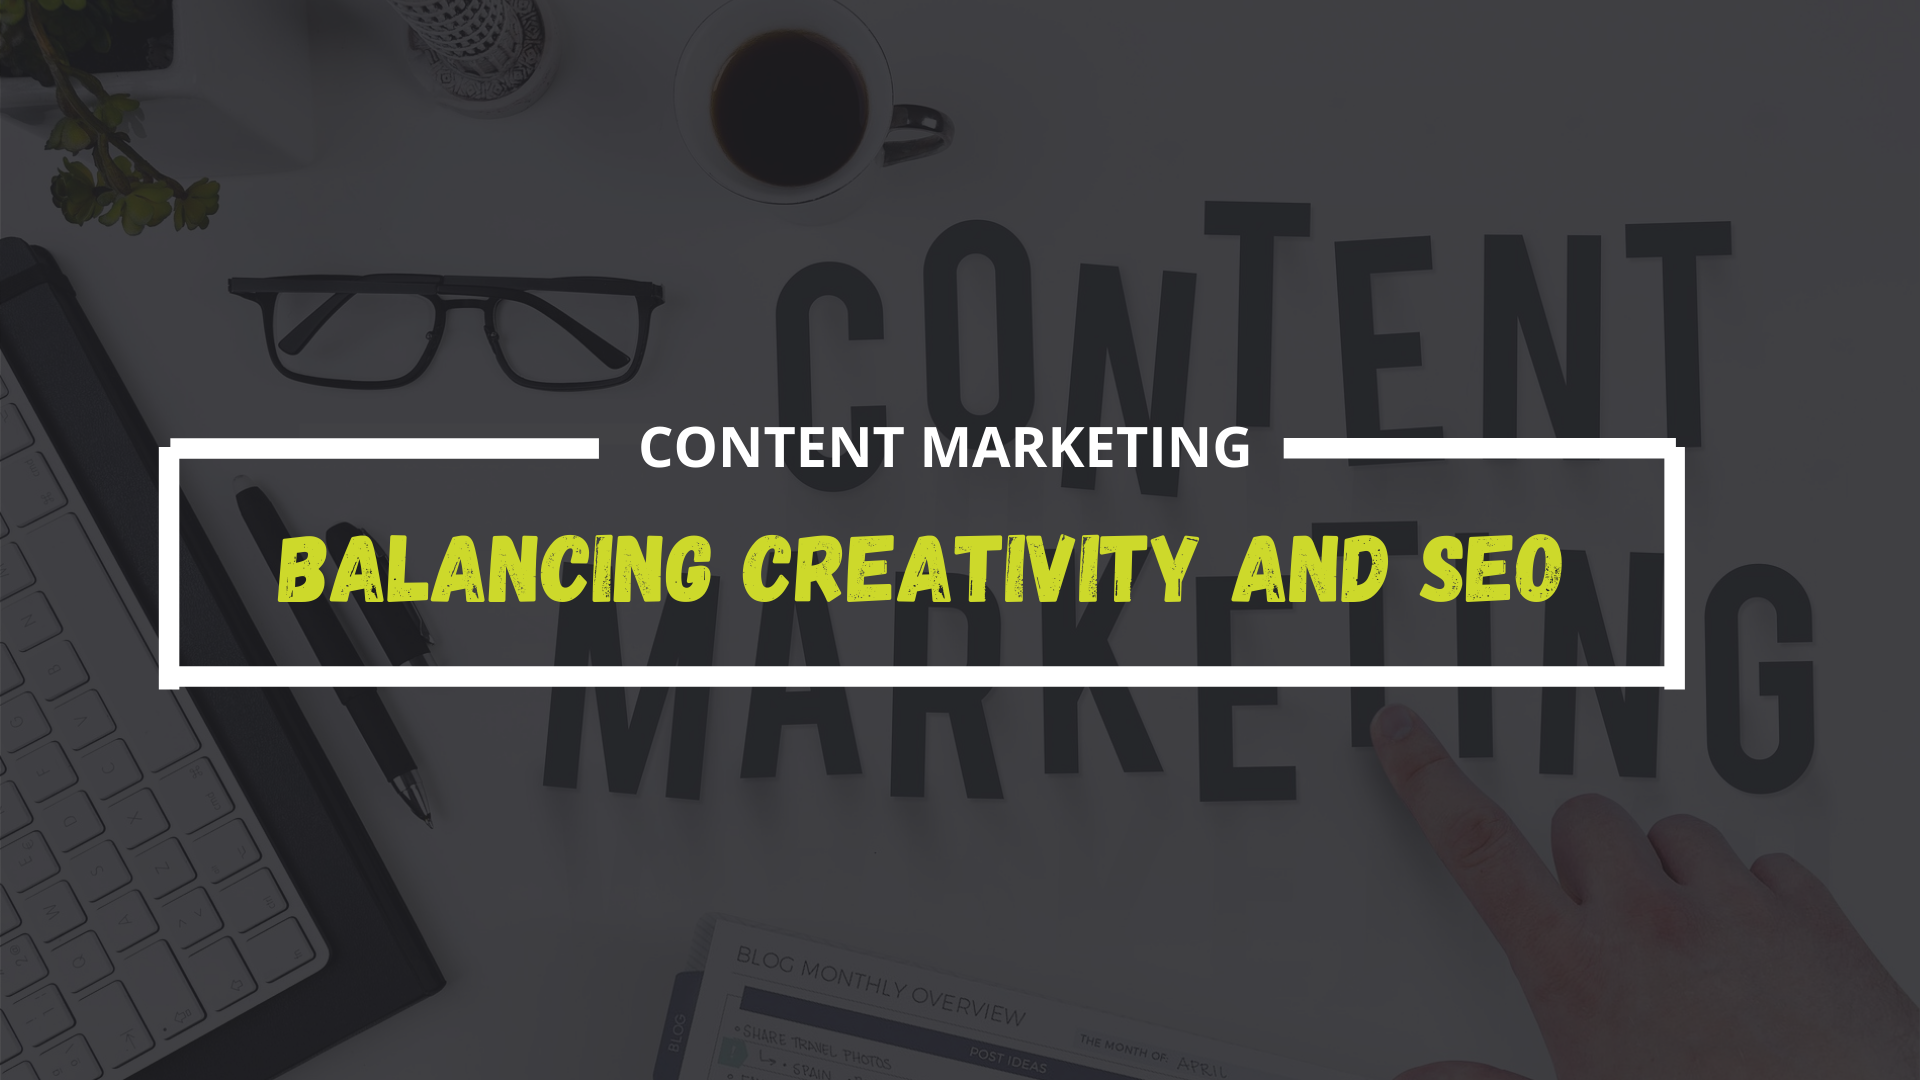 tips-for-balancing-creativity-and-seo-in-content-marketing